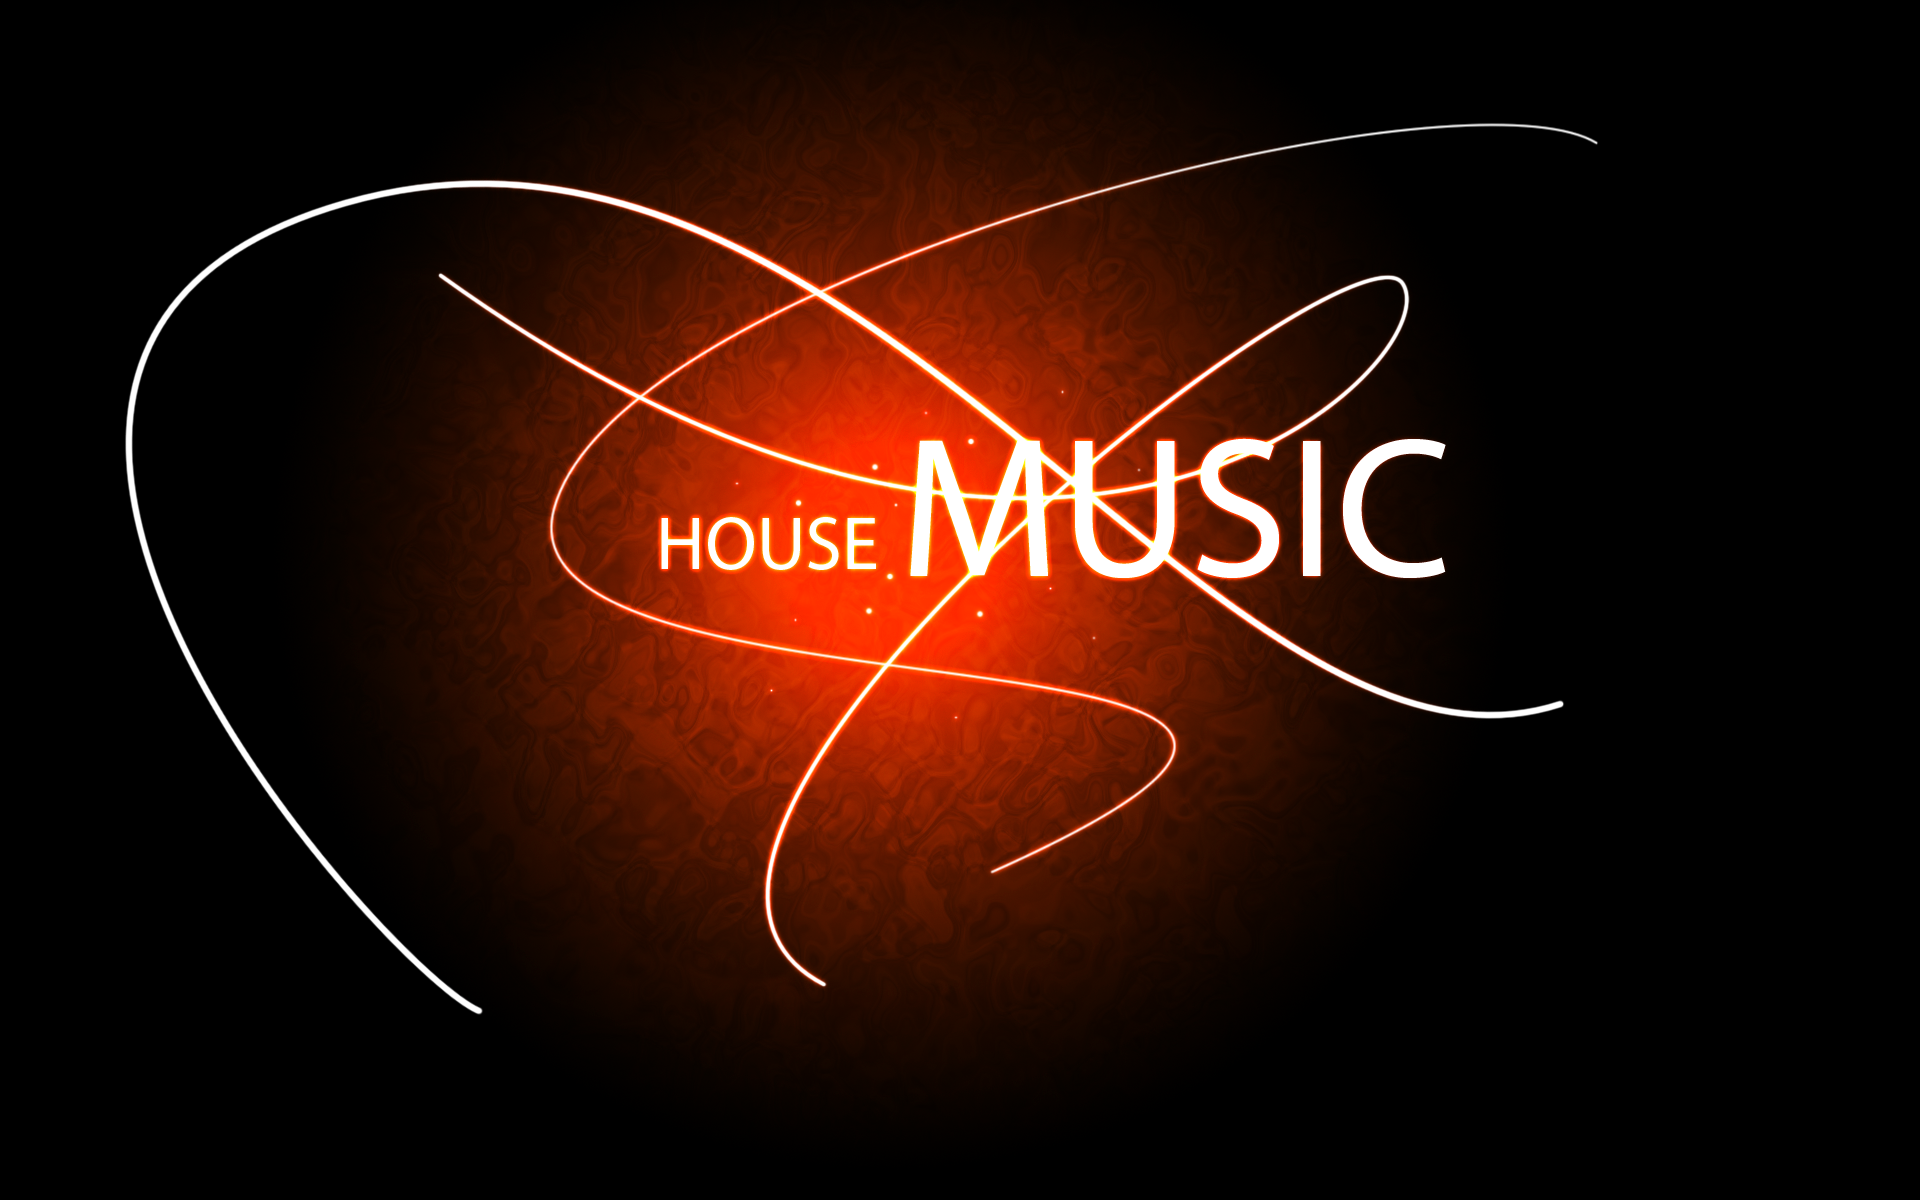 House Music Background By Taan519